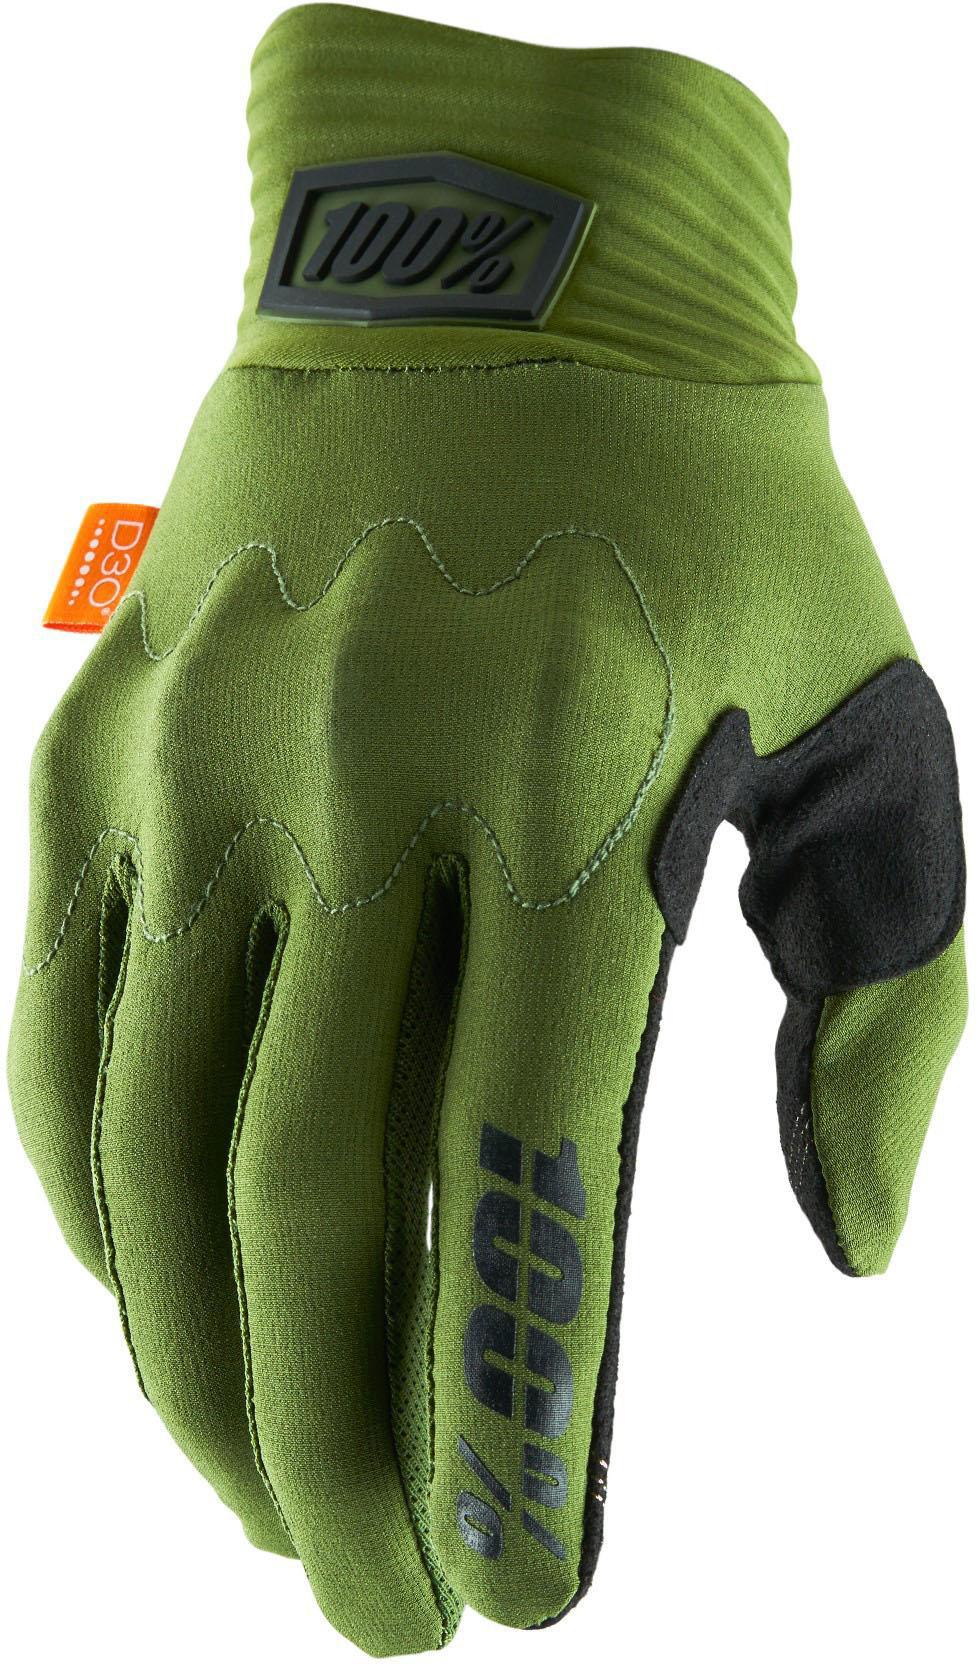 100% Cognito D30 Gloves - Army Green/black